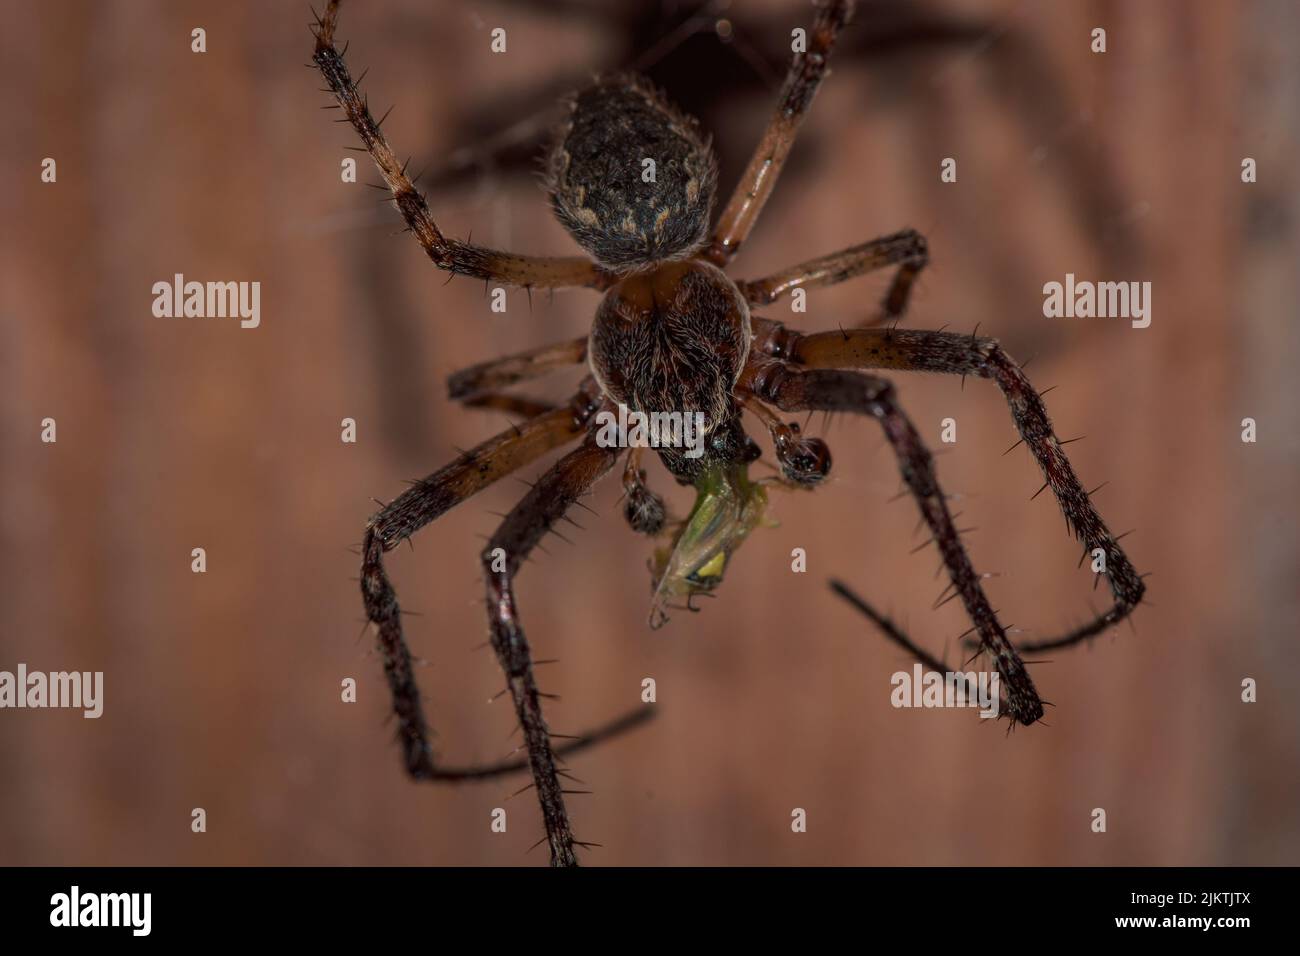 A macro shot of a barn funnel weaver (tegenaria domestica) hanging upside down on a blurred background Stock Photo